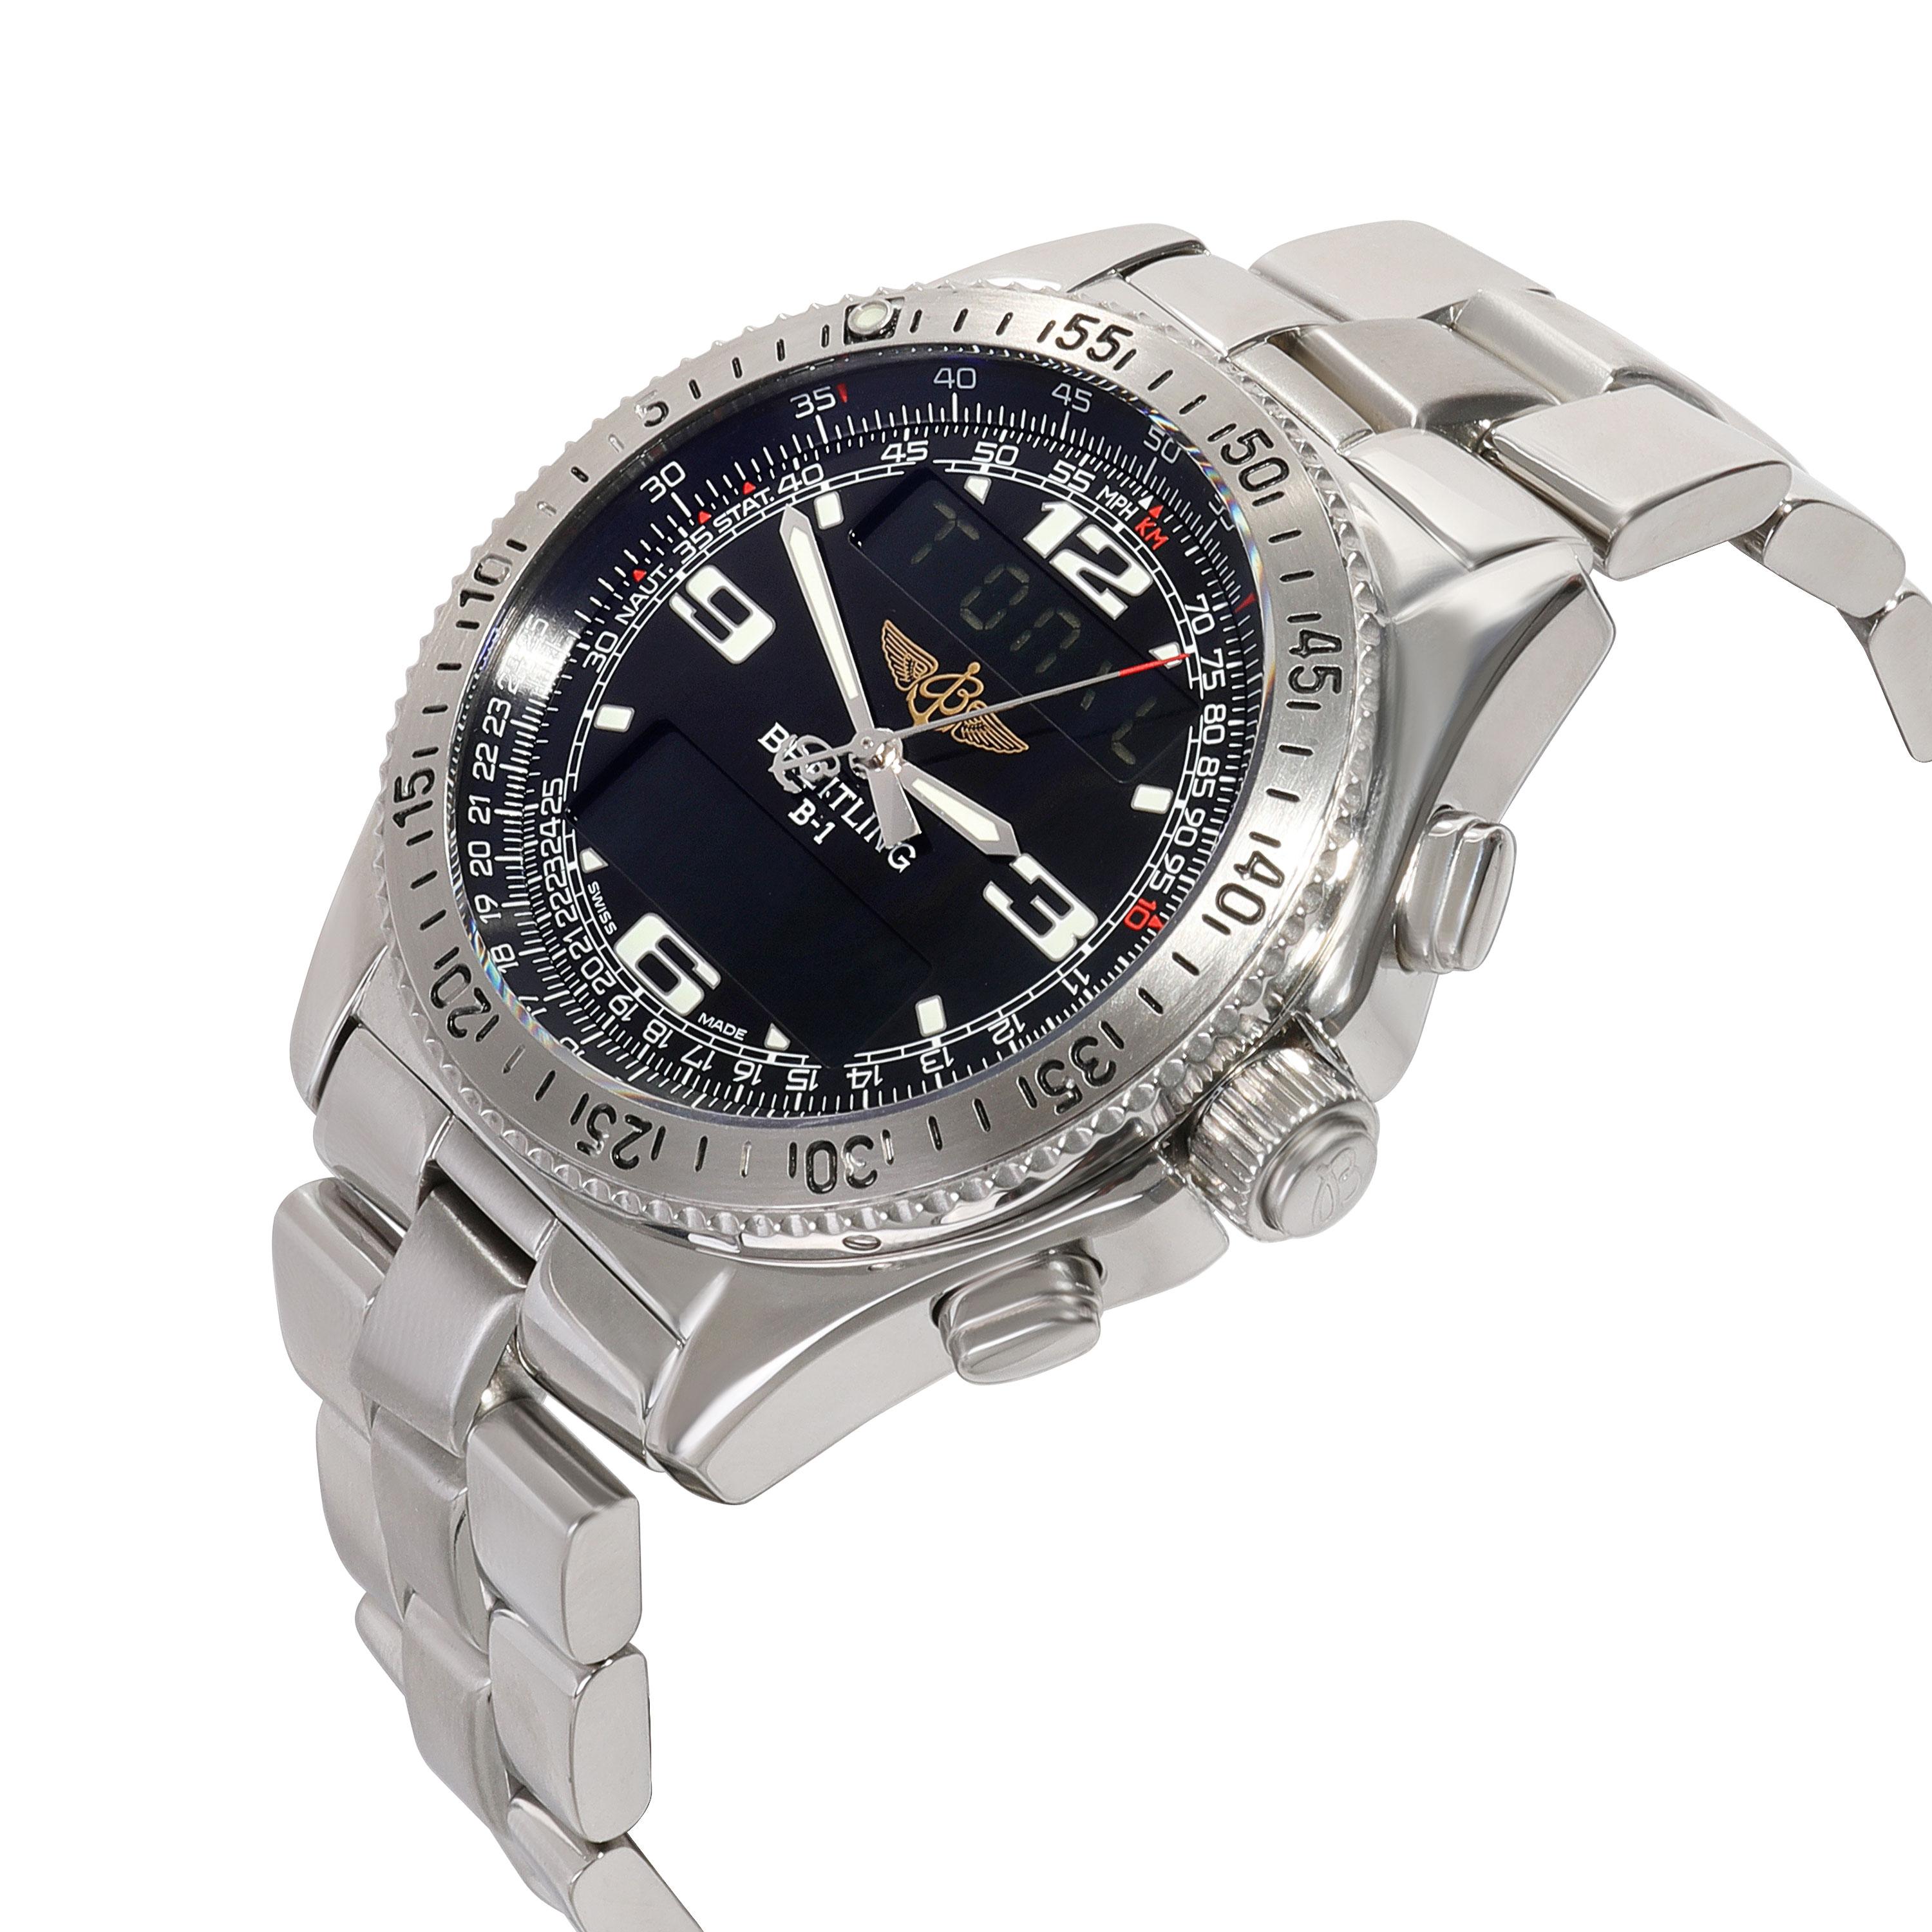 Breitling Professional B-1 A68362 Men's Watch in  Stainless Steel

SKU: 114681

PRIMARY DETAILS
Brand: Breitling
Model: Professional B-1
Country of Origin: Switzerland
Movement Type: Quartz: Battery
Year Manufactured: 2002
Year of Manufacture: